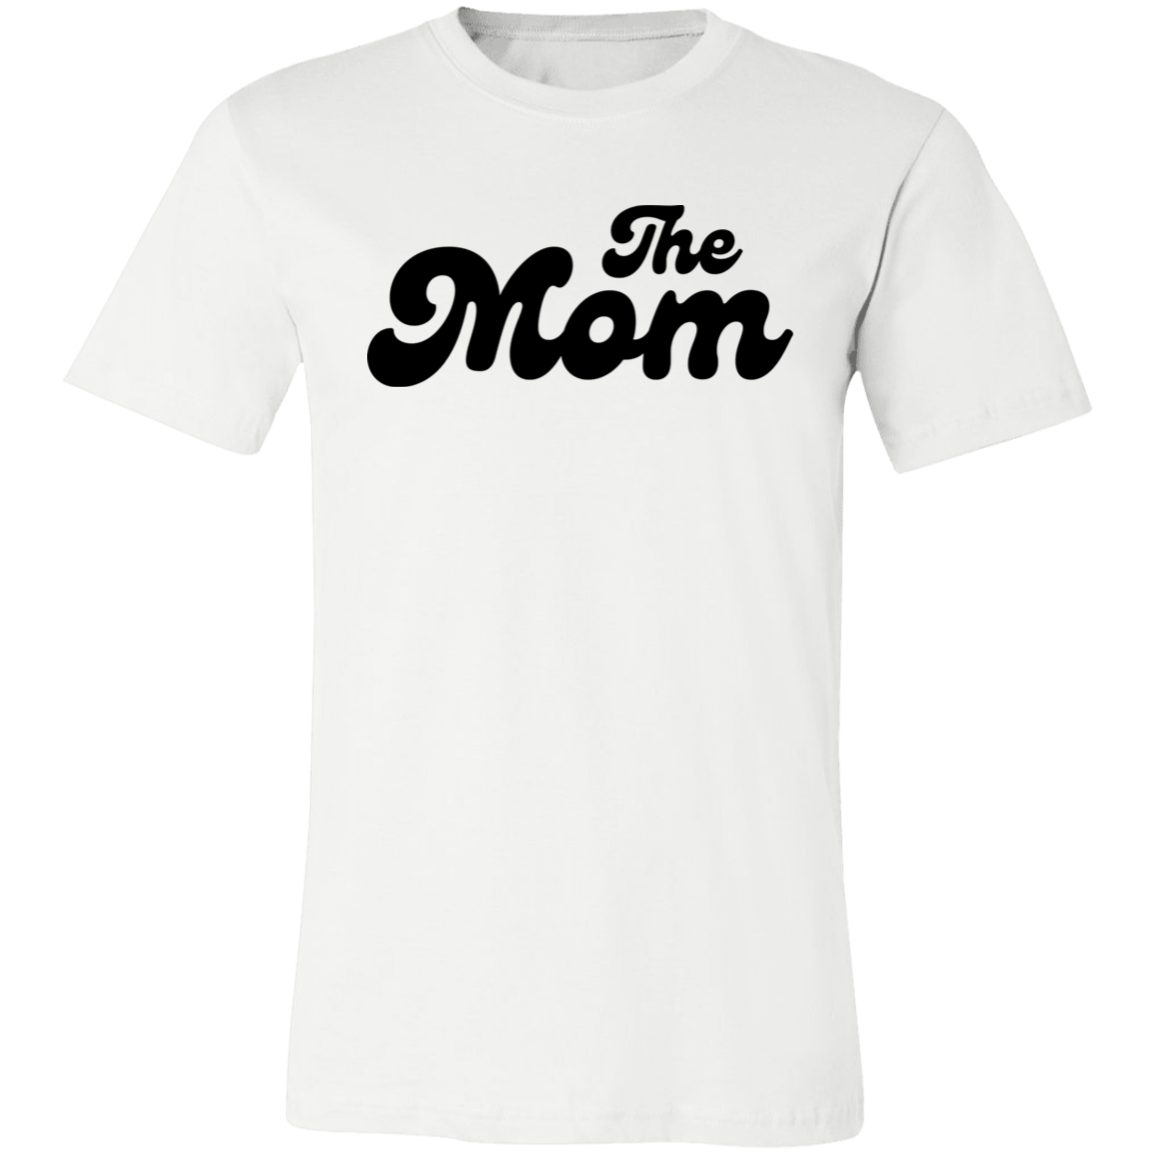 The Dad, The Mom, and The Baby T-Shirts